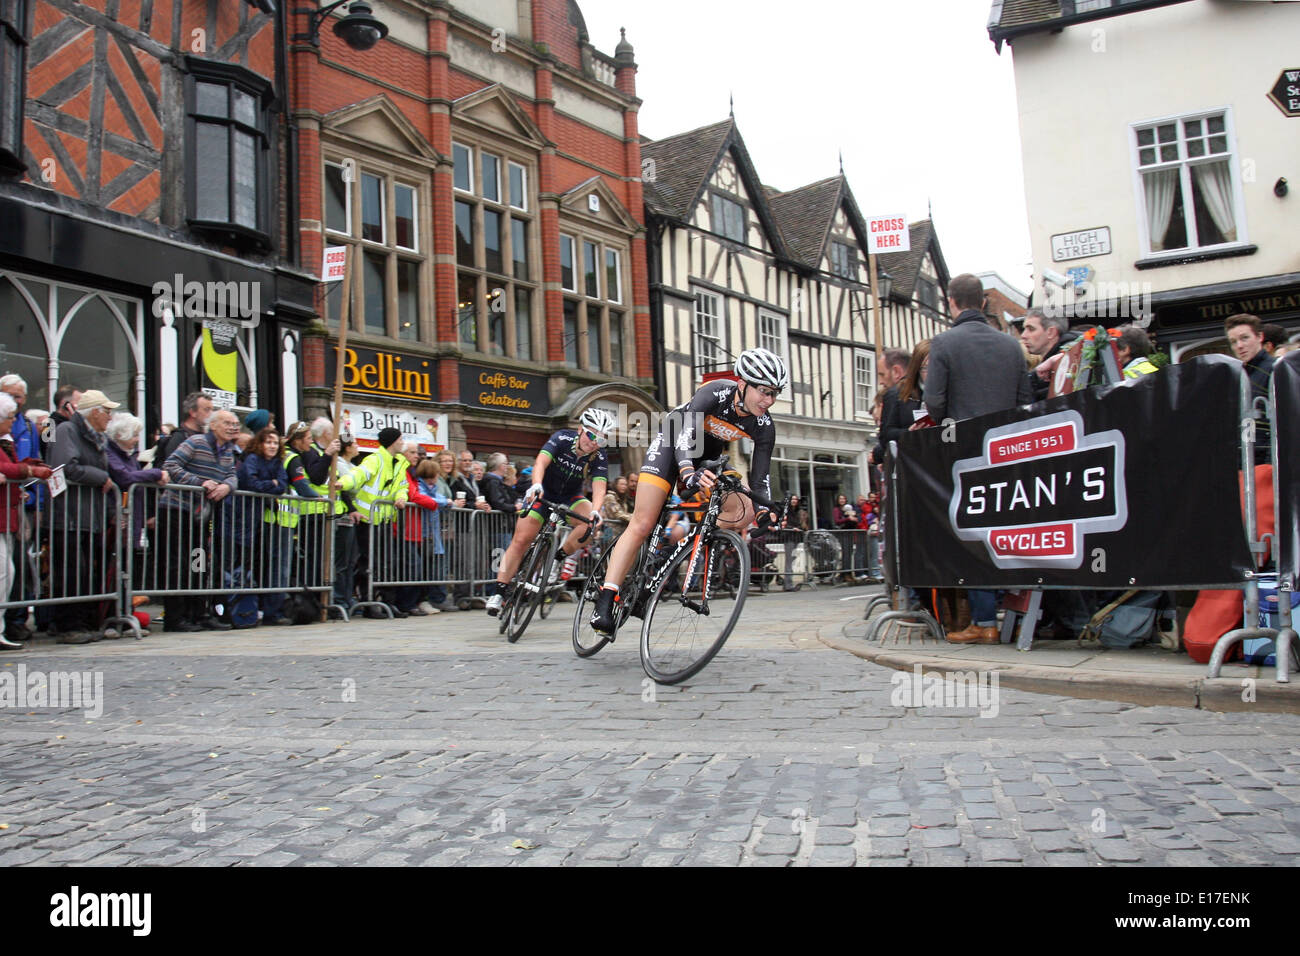 Twenty years ago, Shrewsbury hosted a cycle race that took place around its picturesque town centre. On Sunday May 25th, 2014, the Shrewsbury Cycle Grand Prix returned and featured four events - the fun ride, women’s only, amateur and elite race. The course consisted of smooth tarmac, tight and technical turns and even cobbles and has the full backing of British Cycling. This image shows Joanna Rowsell MBE, who won Olympic gold in the team pursuit in London 2012 as she leads the womens-only race, the eventual winner being Brit Tate. Stock Photo